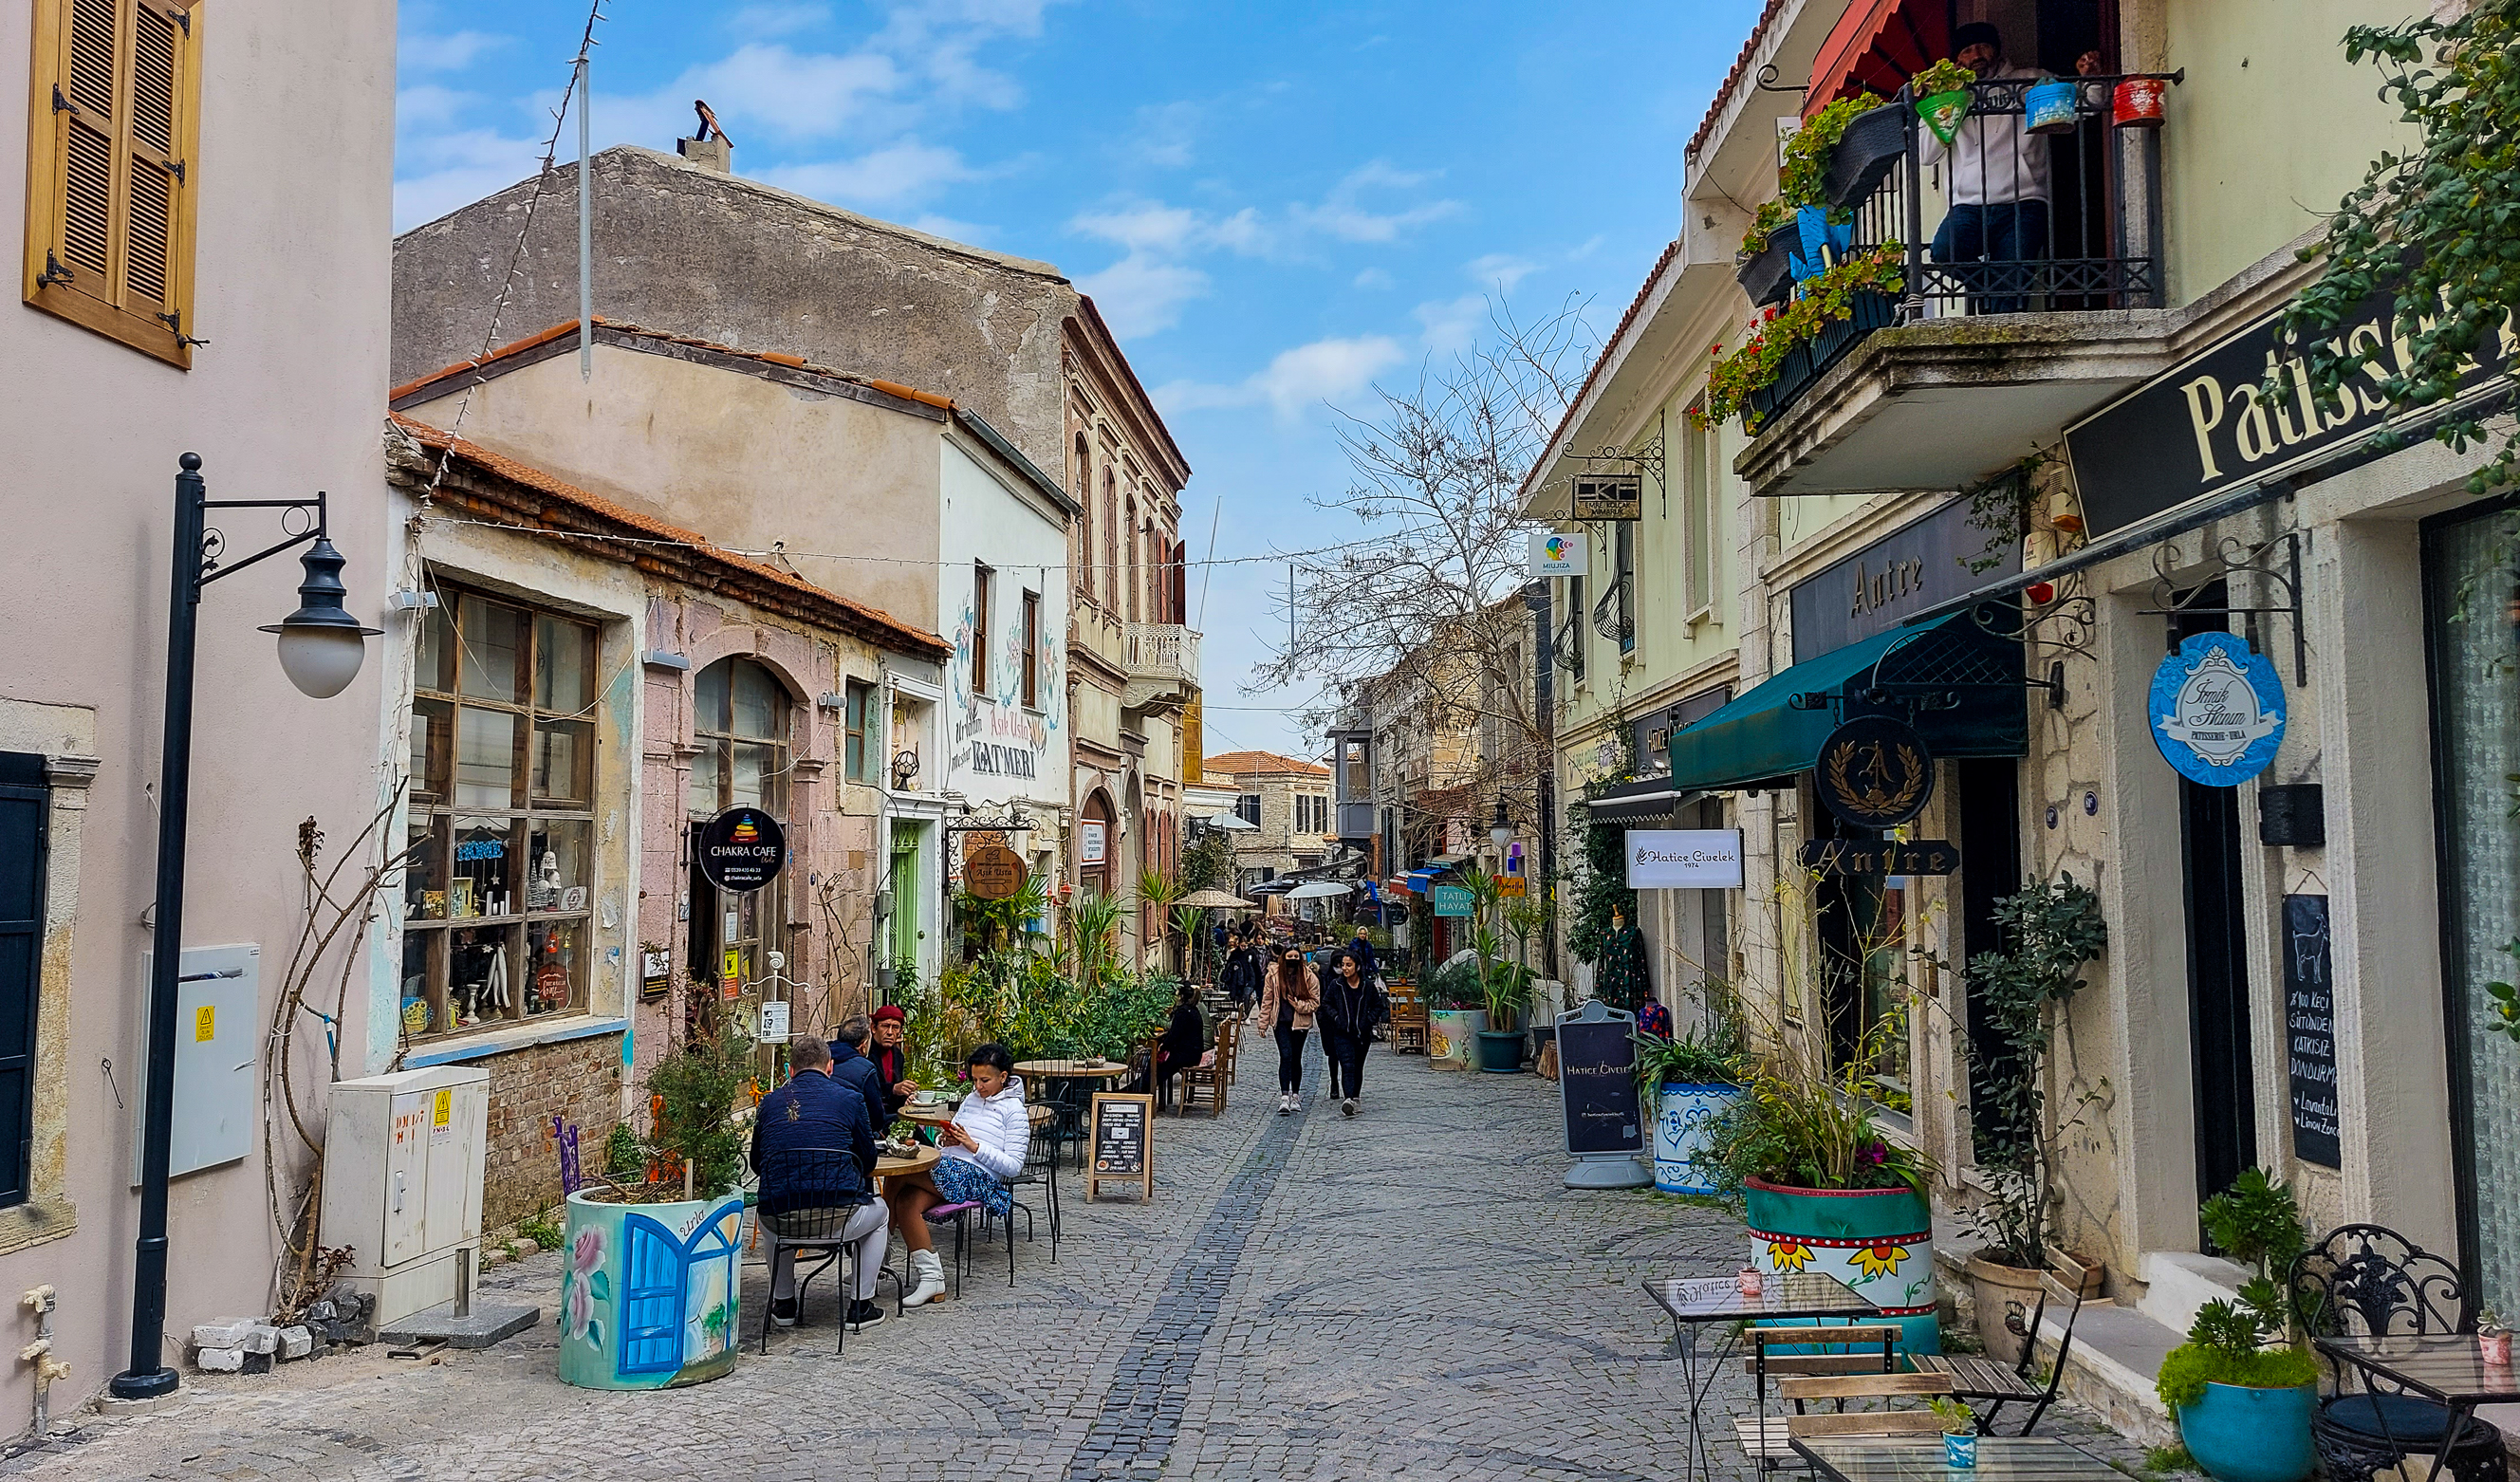 <span  class="uc_style_uc_tiles_grid_image_elementor_uc_items_attribute_title" style="color:#FFFFFF;">The cosy city of 'Urla'</span>